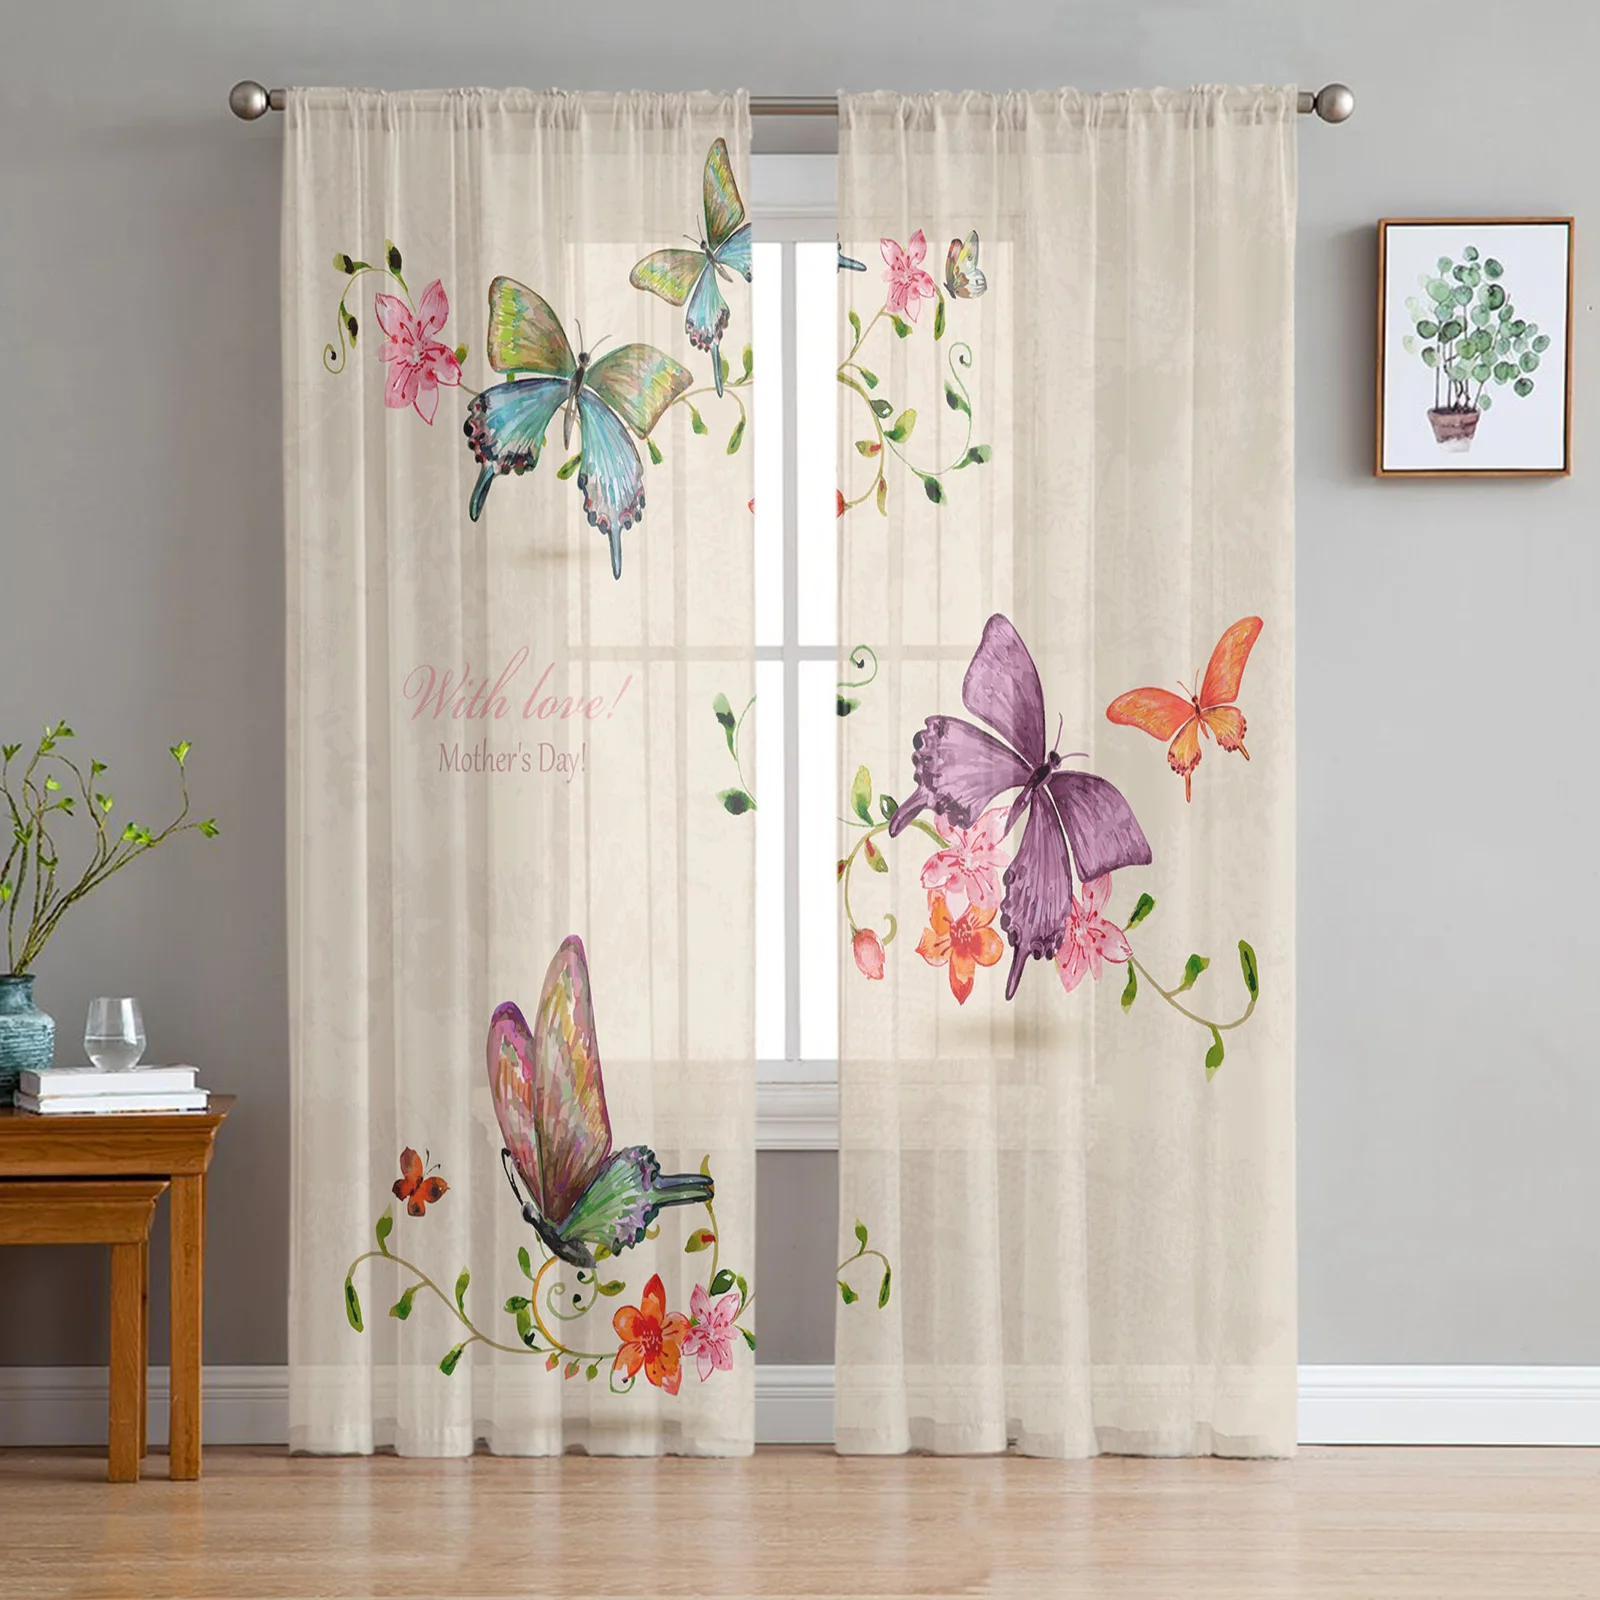 

Butterfly Flowers Vintage Style Tulle in Sheer Curtains for Living Room Bedroom Kitchen Window Treatment Chiffon Curtain Blinds